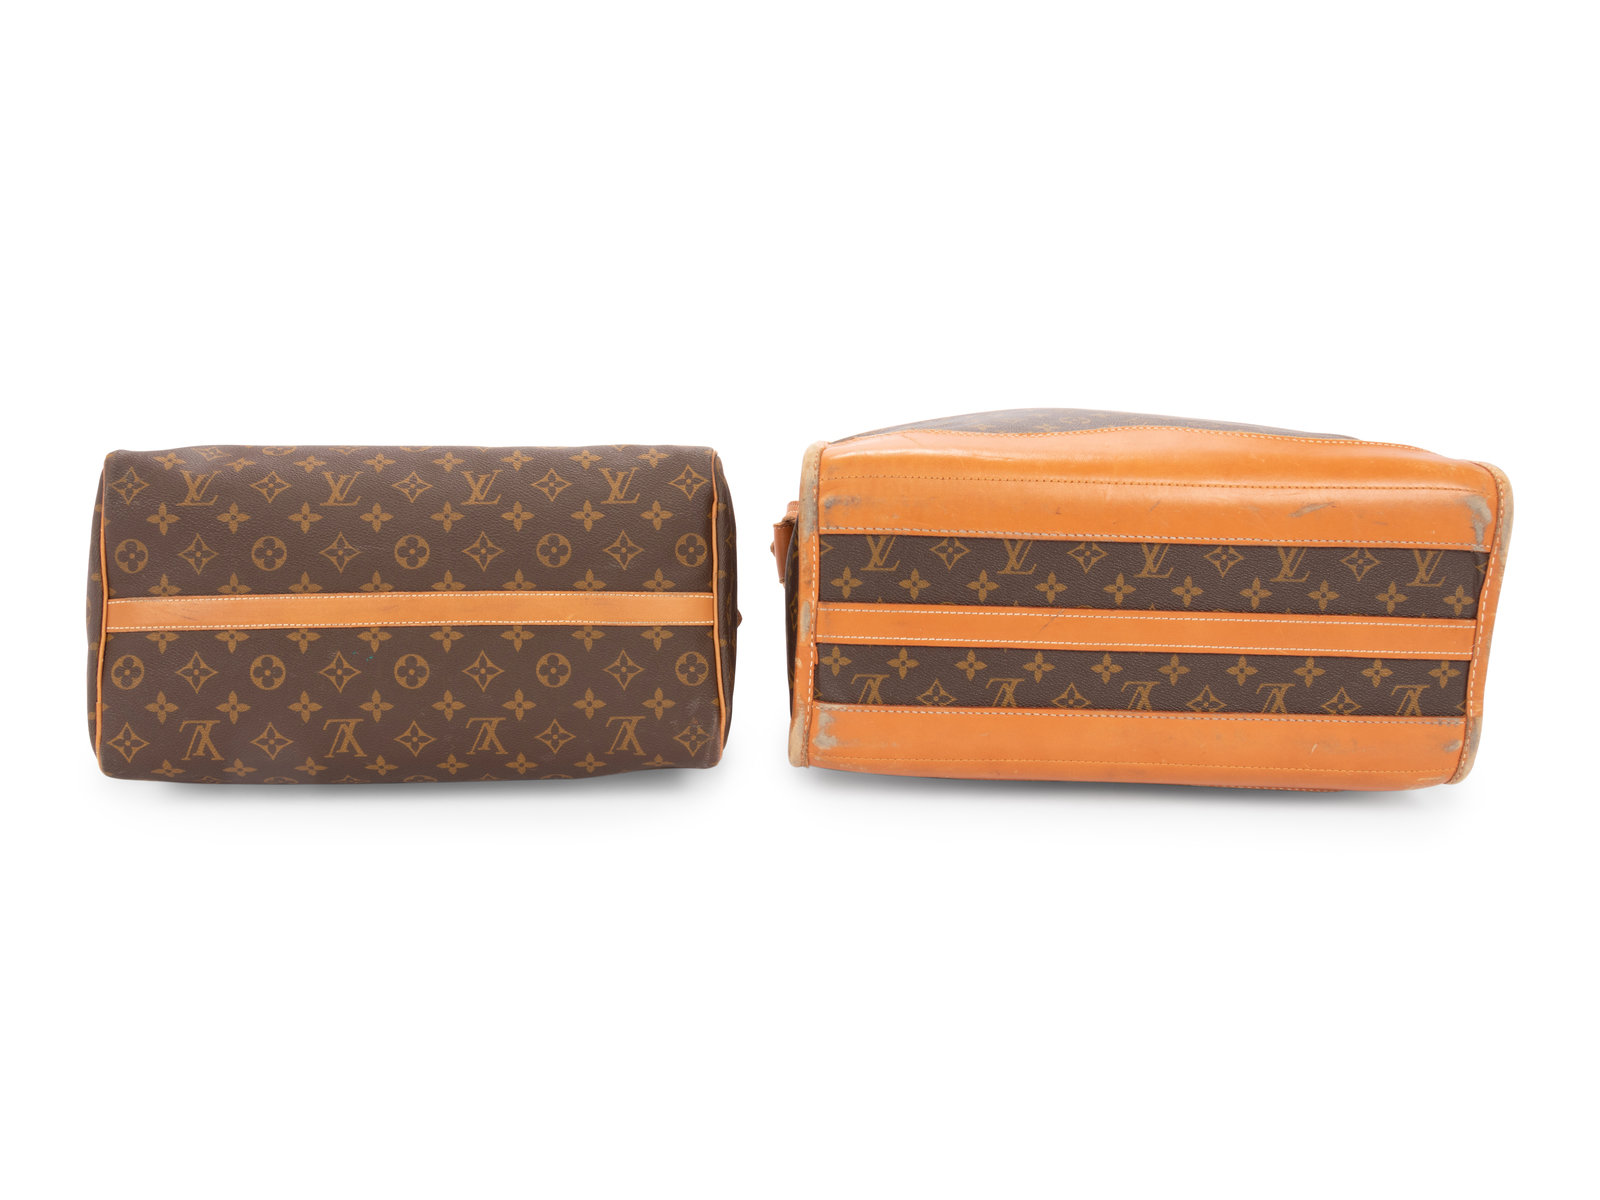 1970s Louis Vuitton - 54 For Sale on 1stDibs